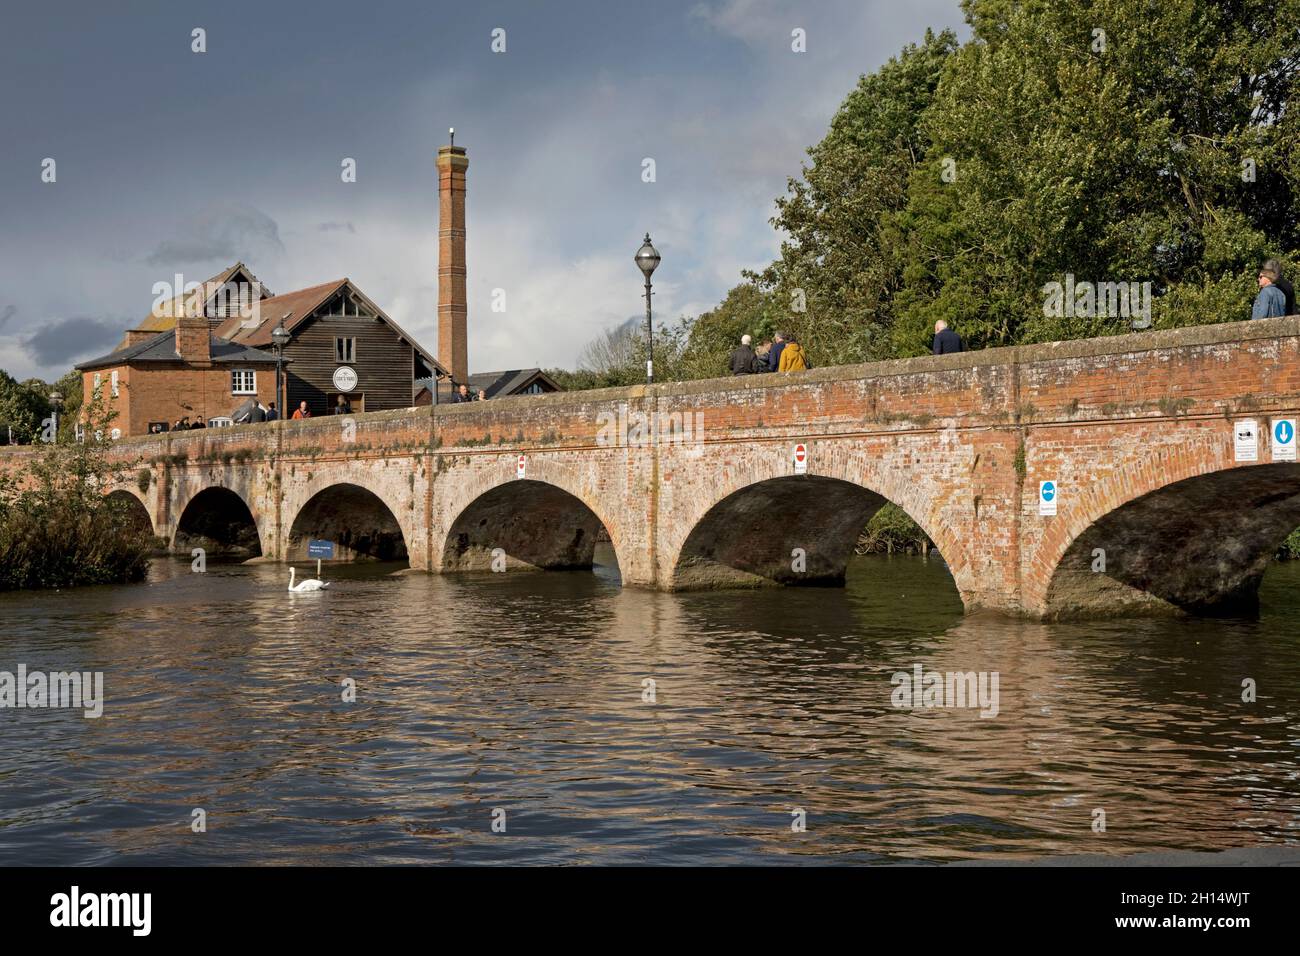 Tramway Bridge is a redbrick structure built over the River Avon in 1823 to carry the horse tramway which connected the wharves at Stratford upon Avon Stock Photo